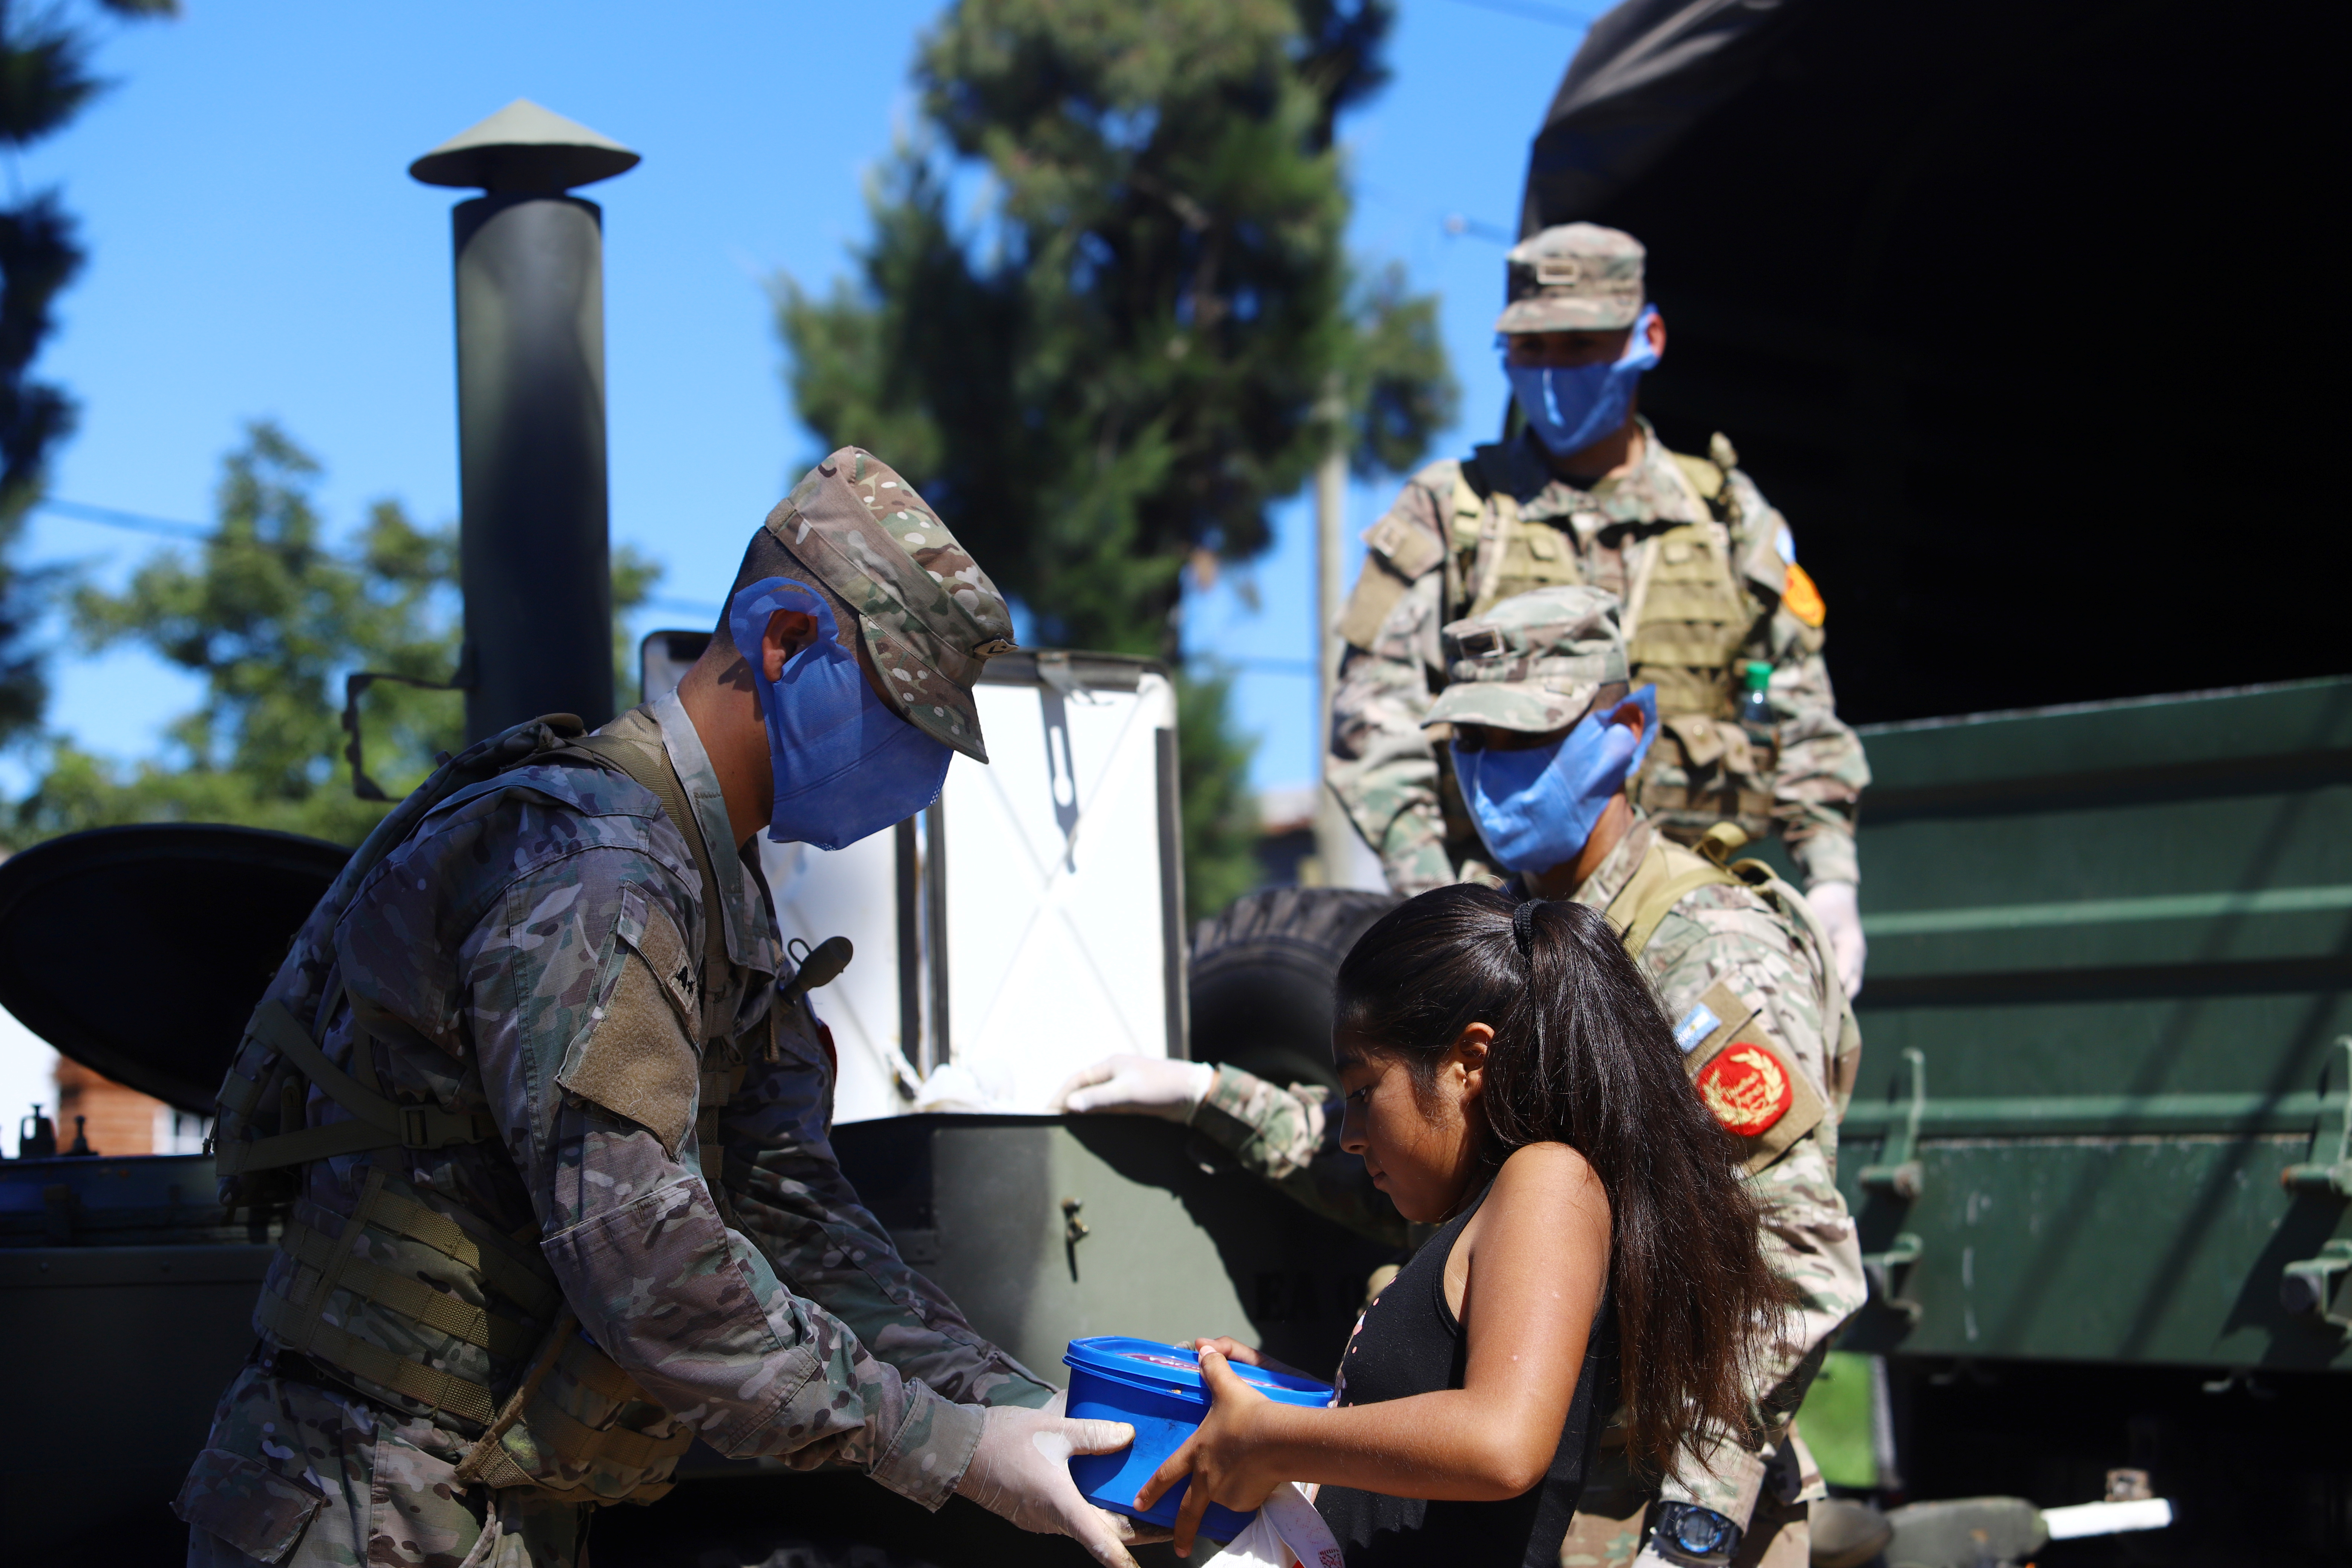 Military staff wearing protective masks delivers a ration of food aid, organized by the municipality for a low-income neighborhood, during the mandatory quarantine for coronavirus disease (COVID-19), in Quilmes, on the outskirts of Buenos Aires, Argentina March 23, 2020